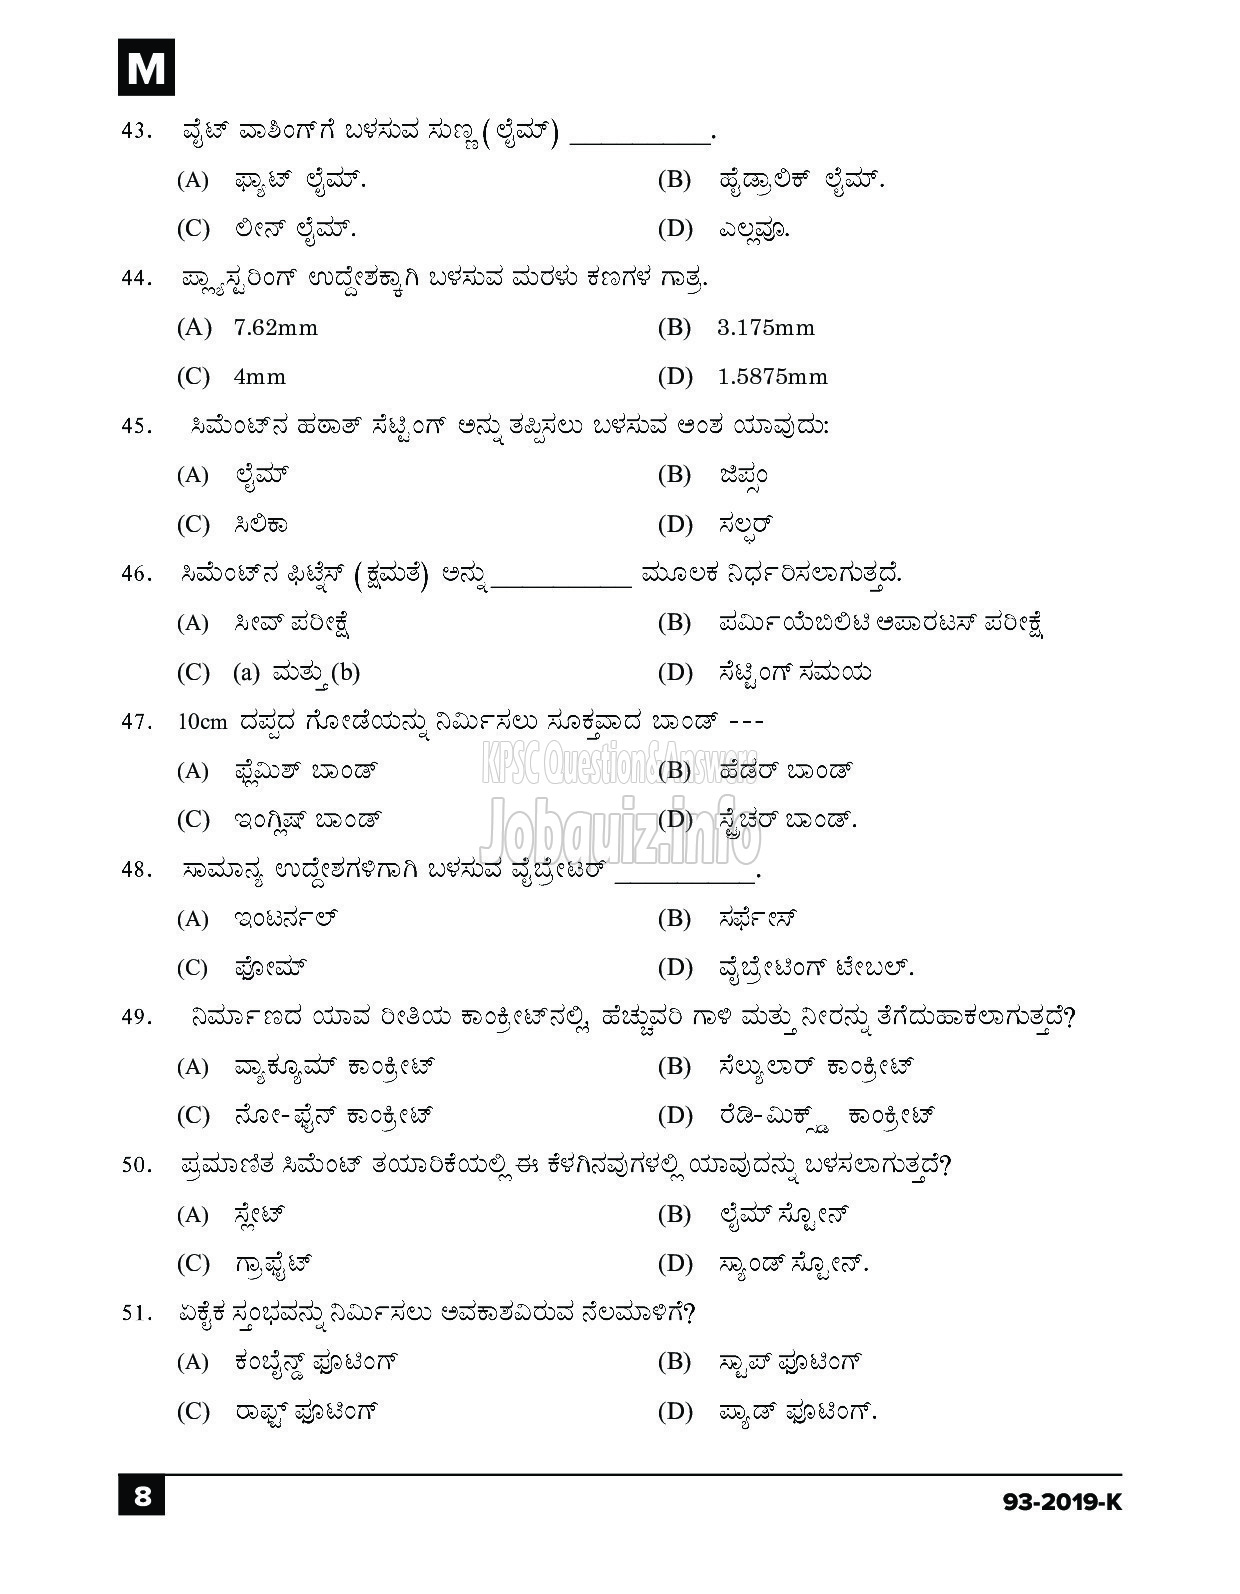 Kerala PSC Question Paper - Workshop Attender (Architectural Assistant) SR From SC/ST Industrial Training KANNADA-8